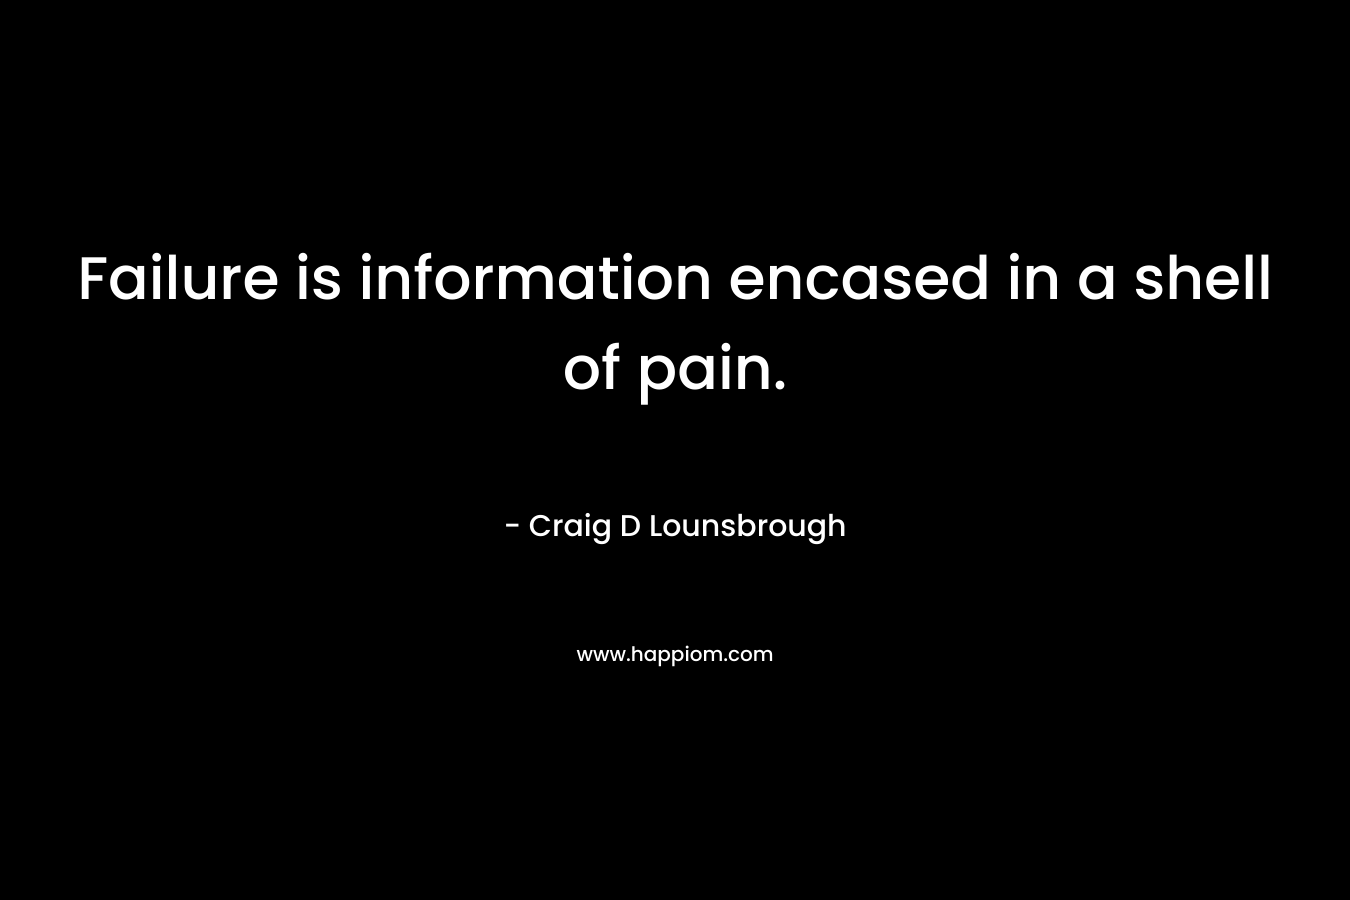 Failure is information encased in a shell of pain. – Craig D Lounsbrough